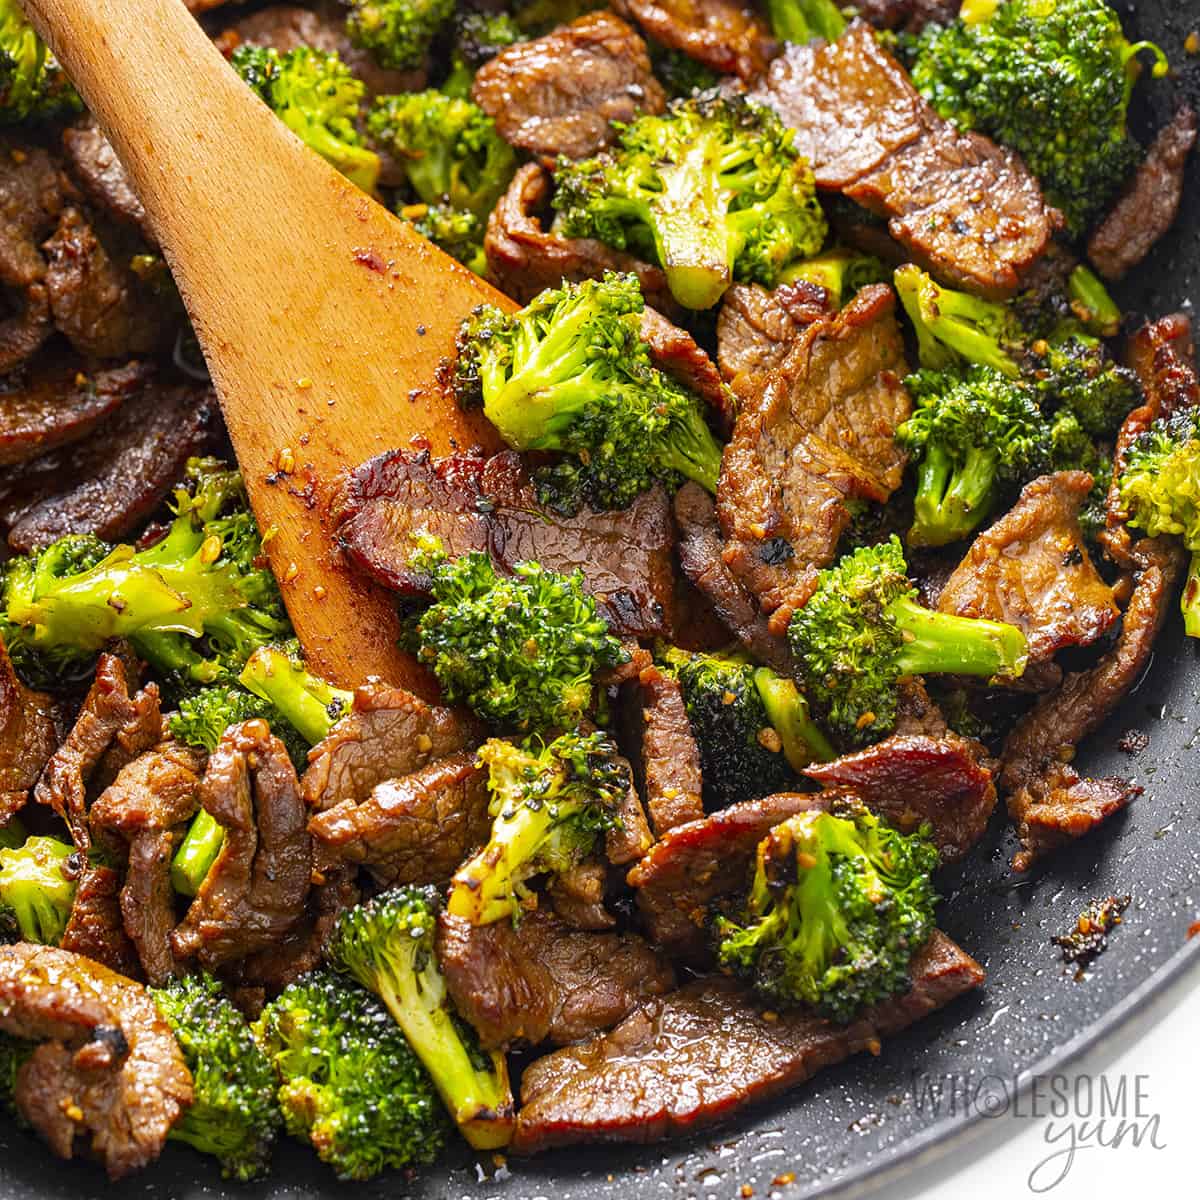 Keto beef and broccoli close up.